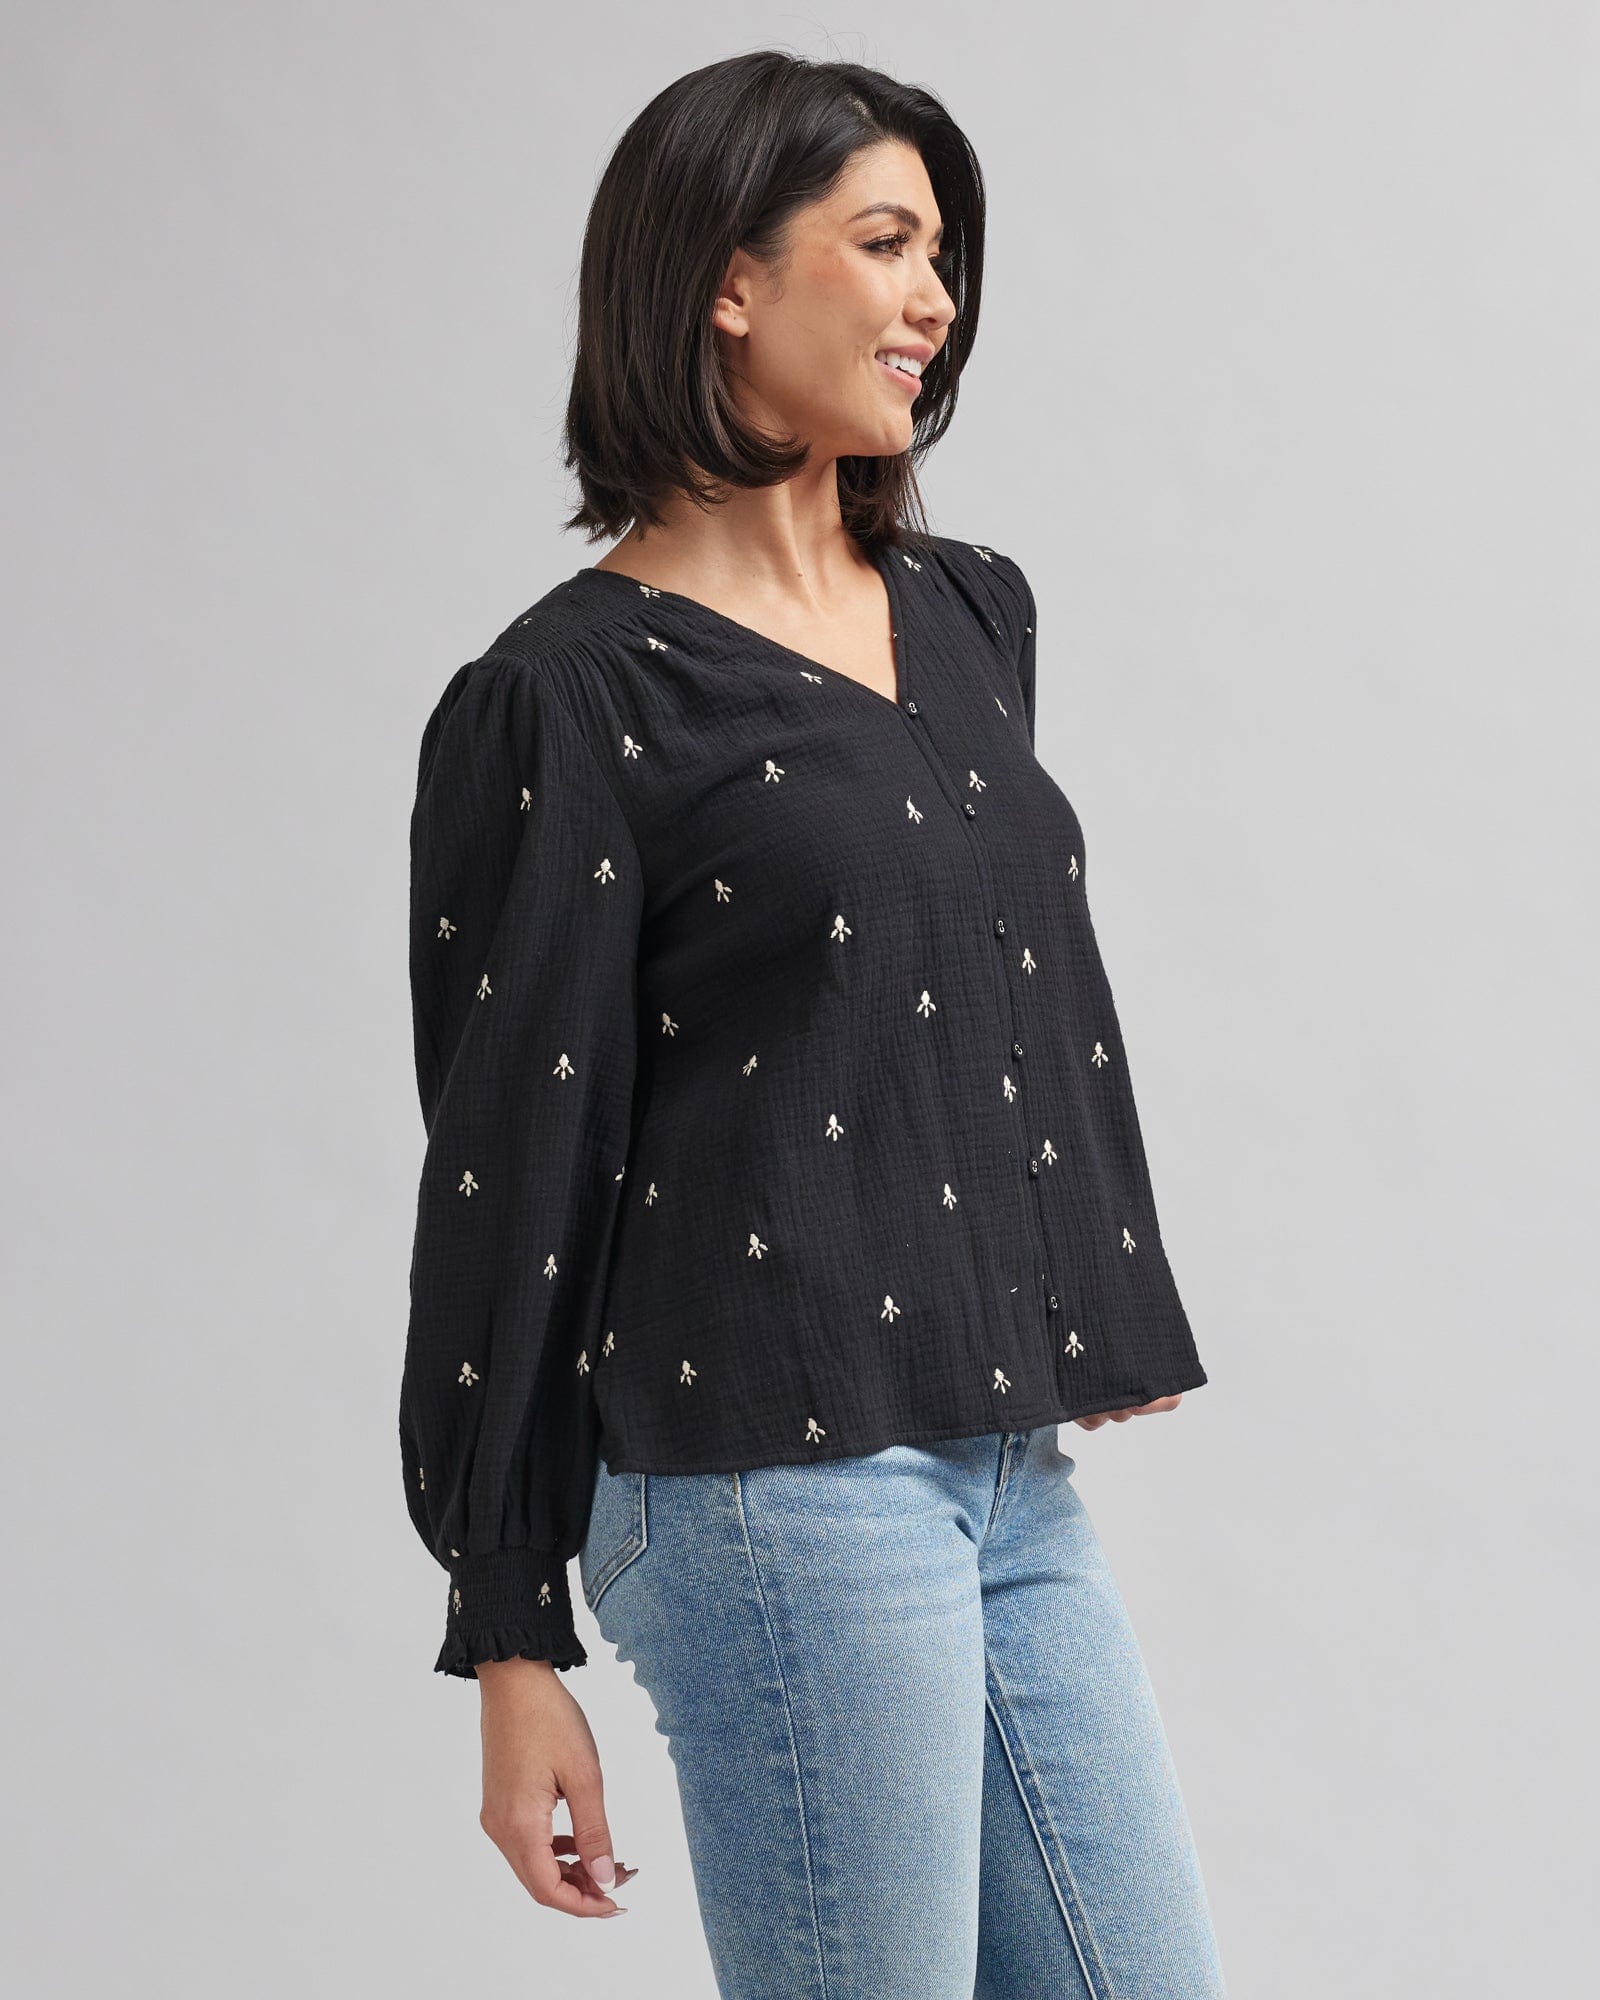 Woman in a long sleeve black with white accent blouse